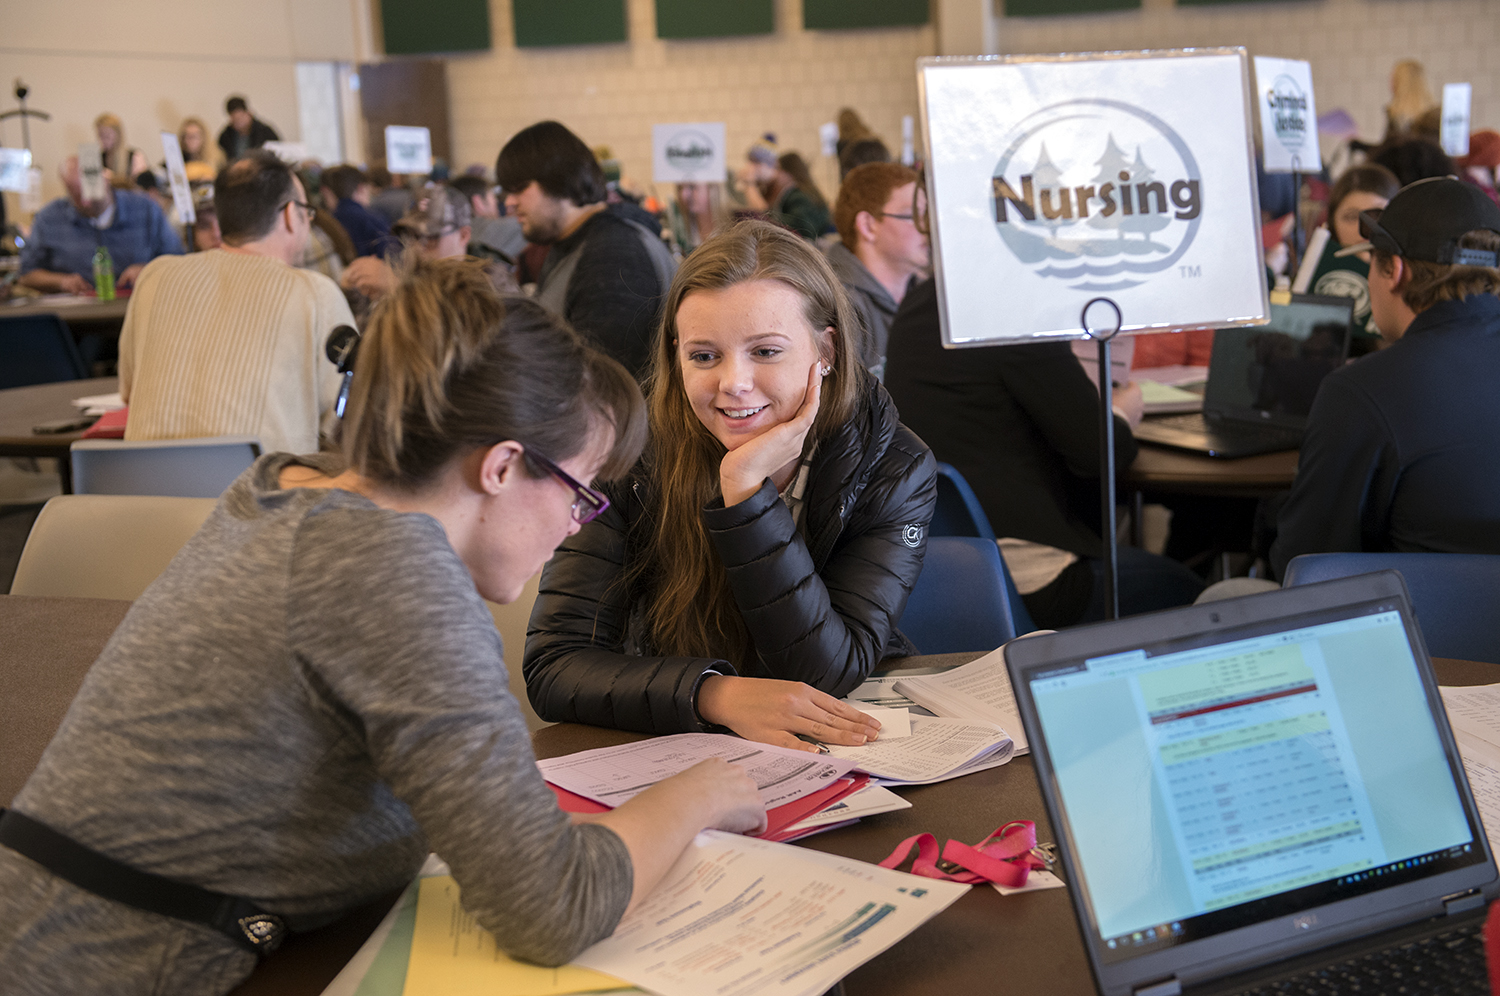 Student being advised by a nursing mentor